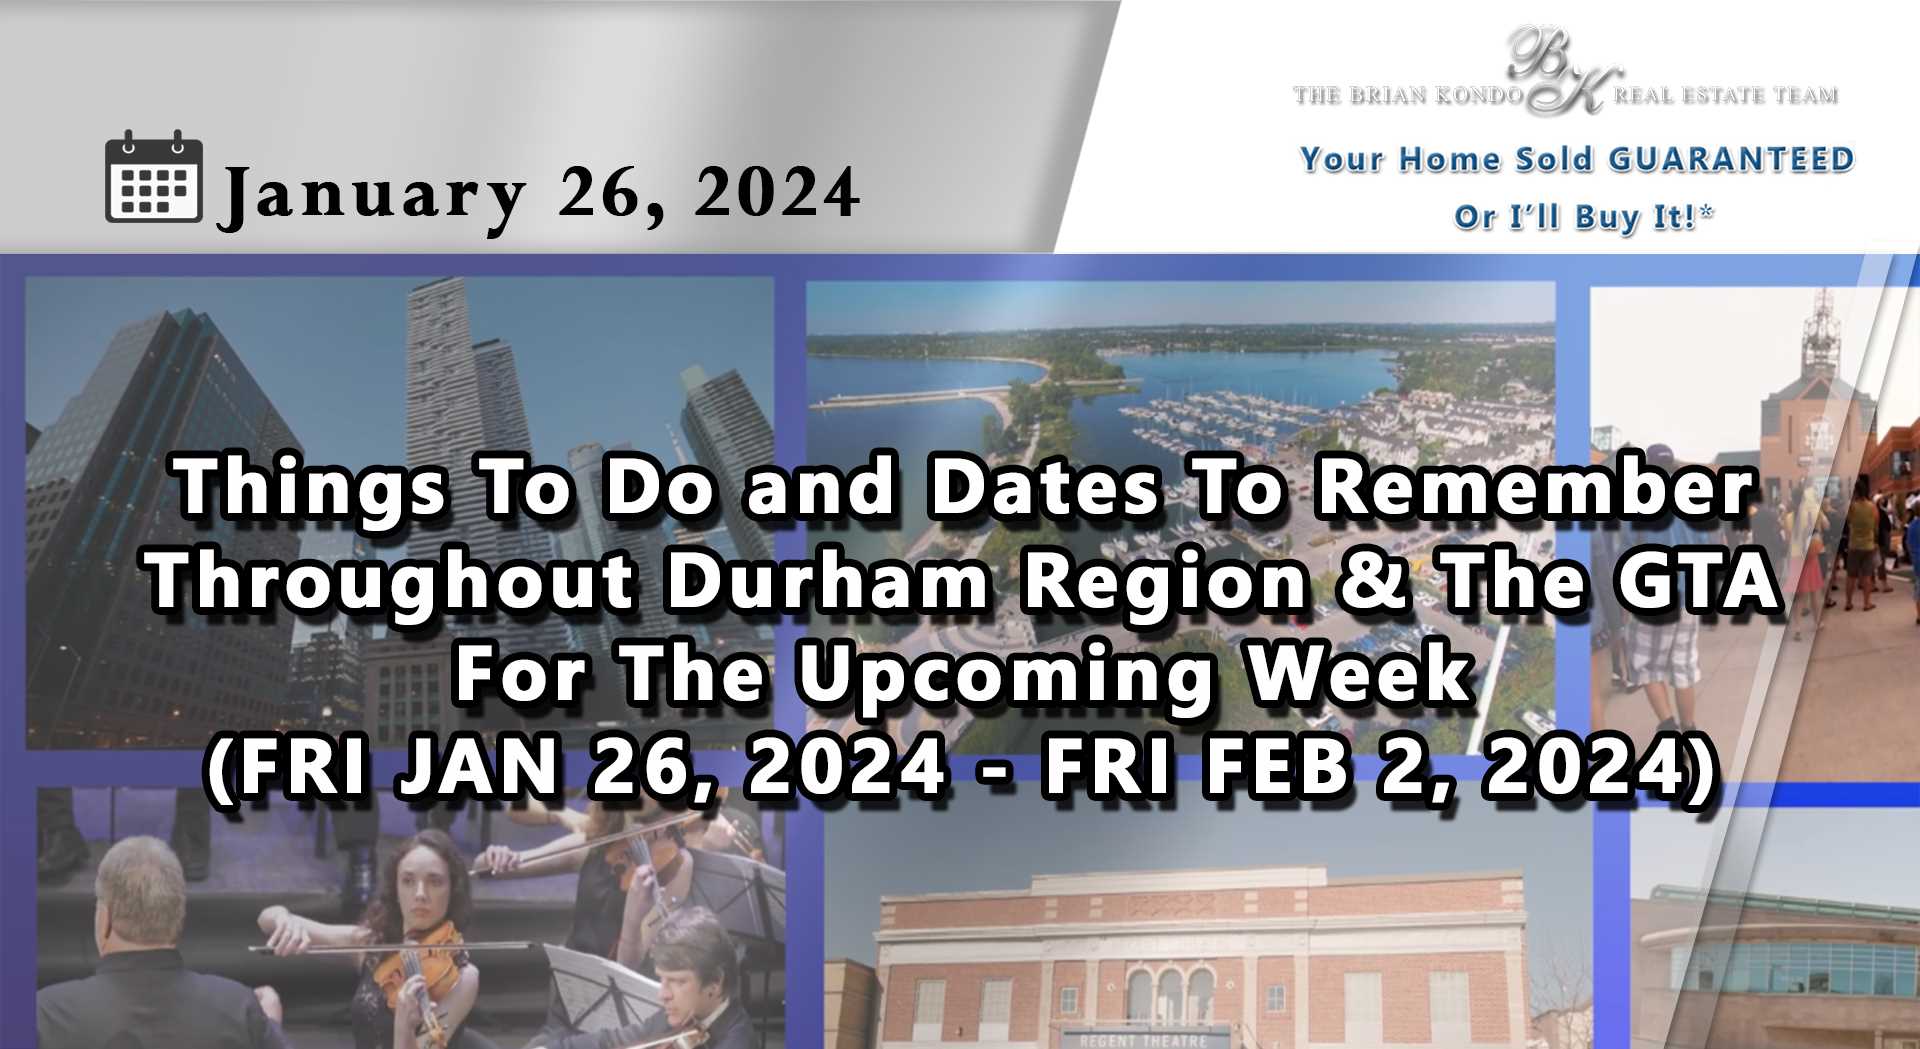 Things To Do and Dates To Remember Throughout Durham Region and The GTA For The Upcoming Week (FRI JAN 26, 2024 - FRI FEB 2, 2024)